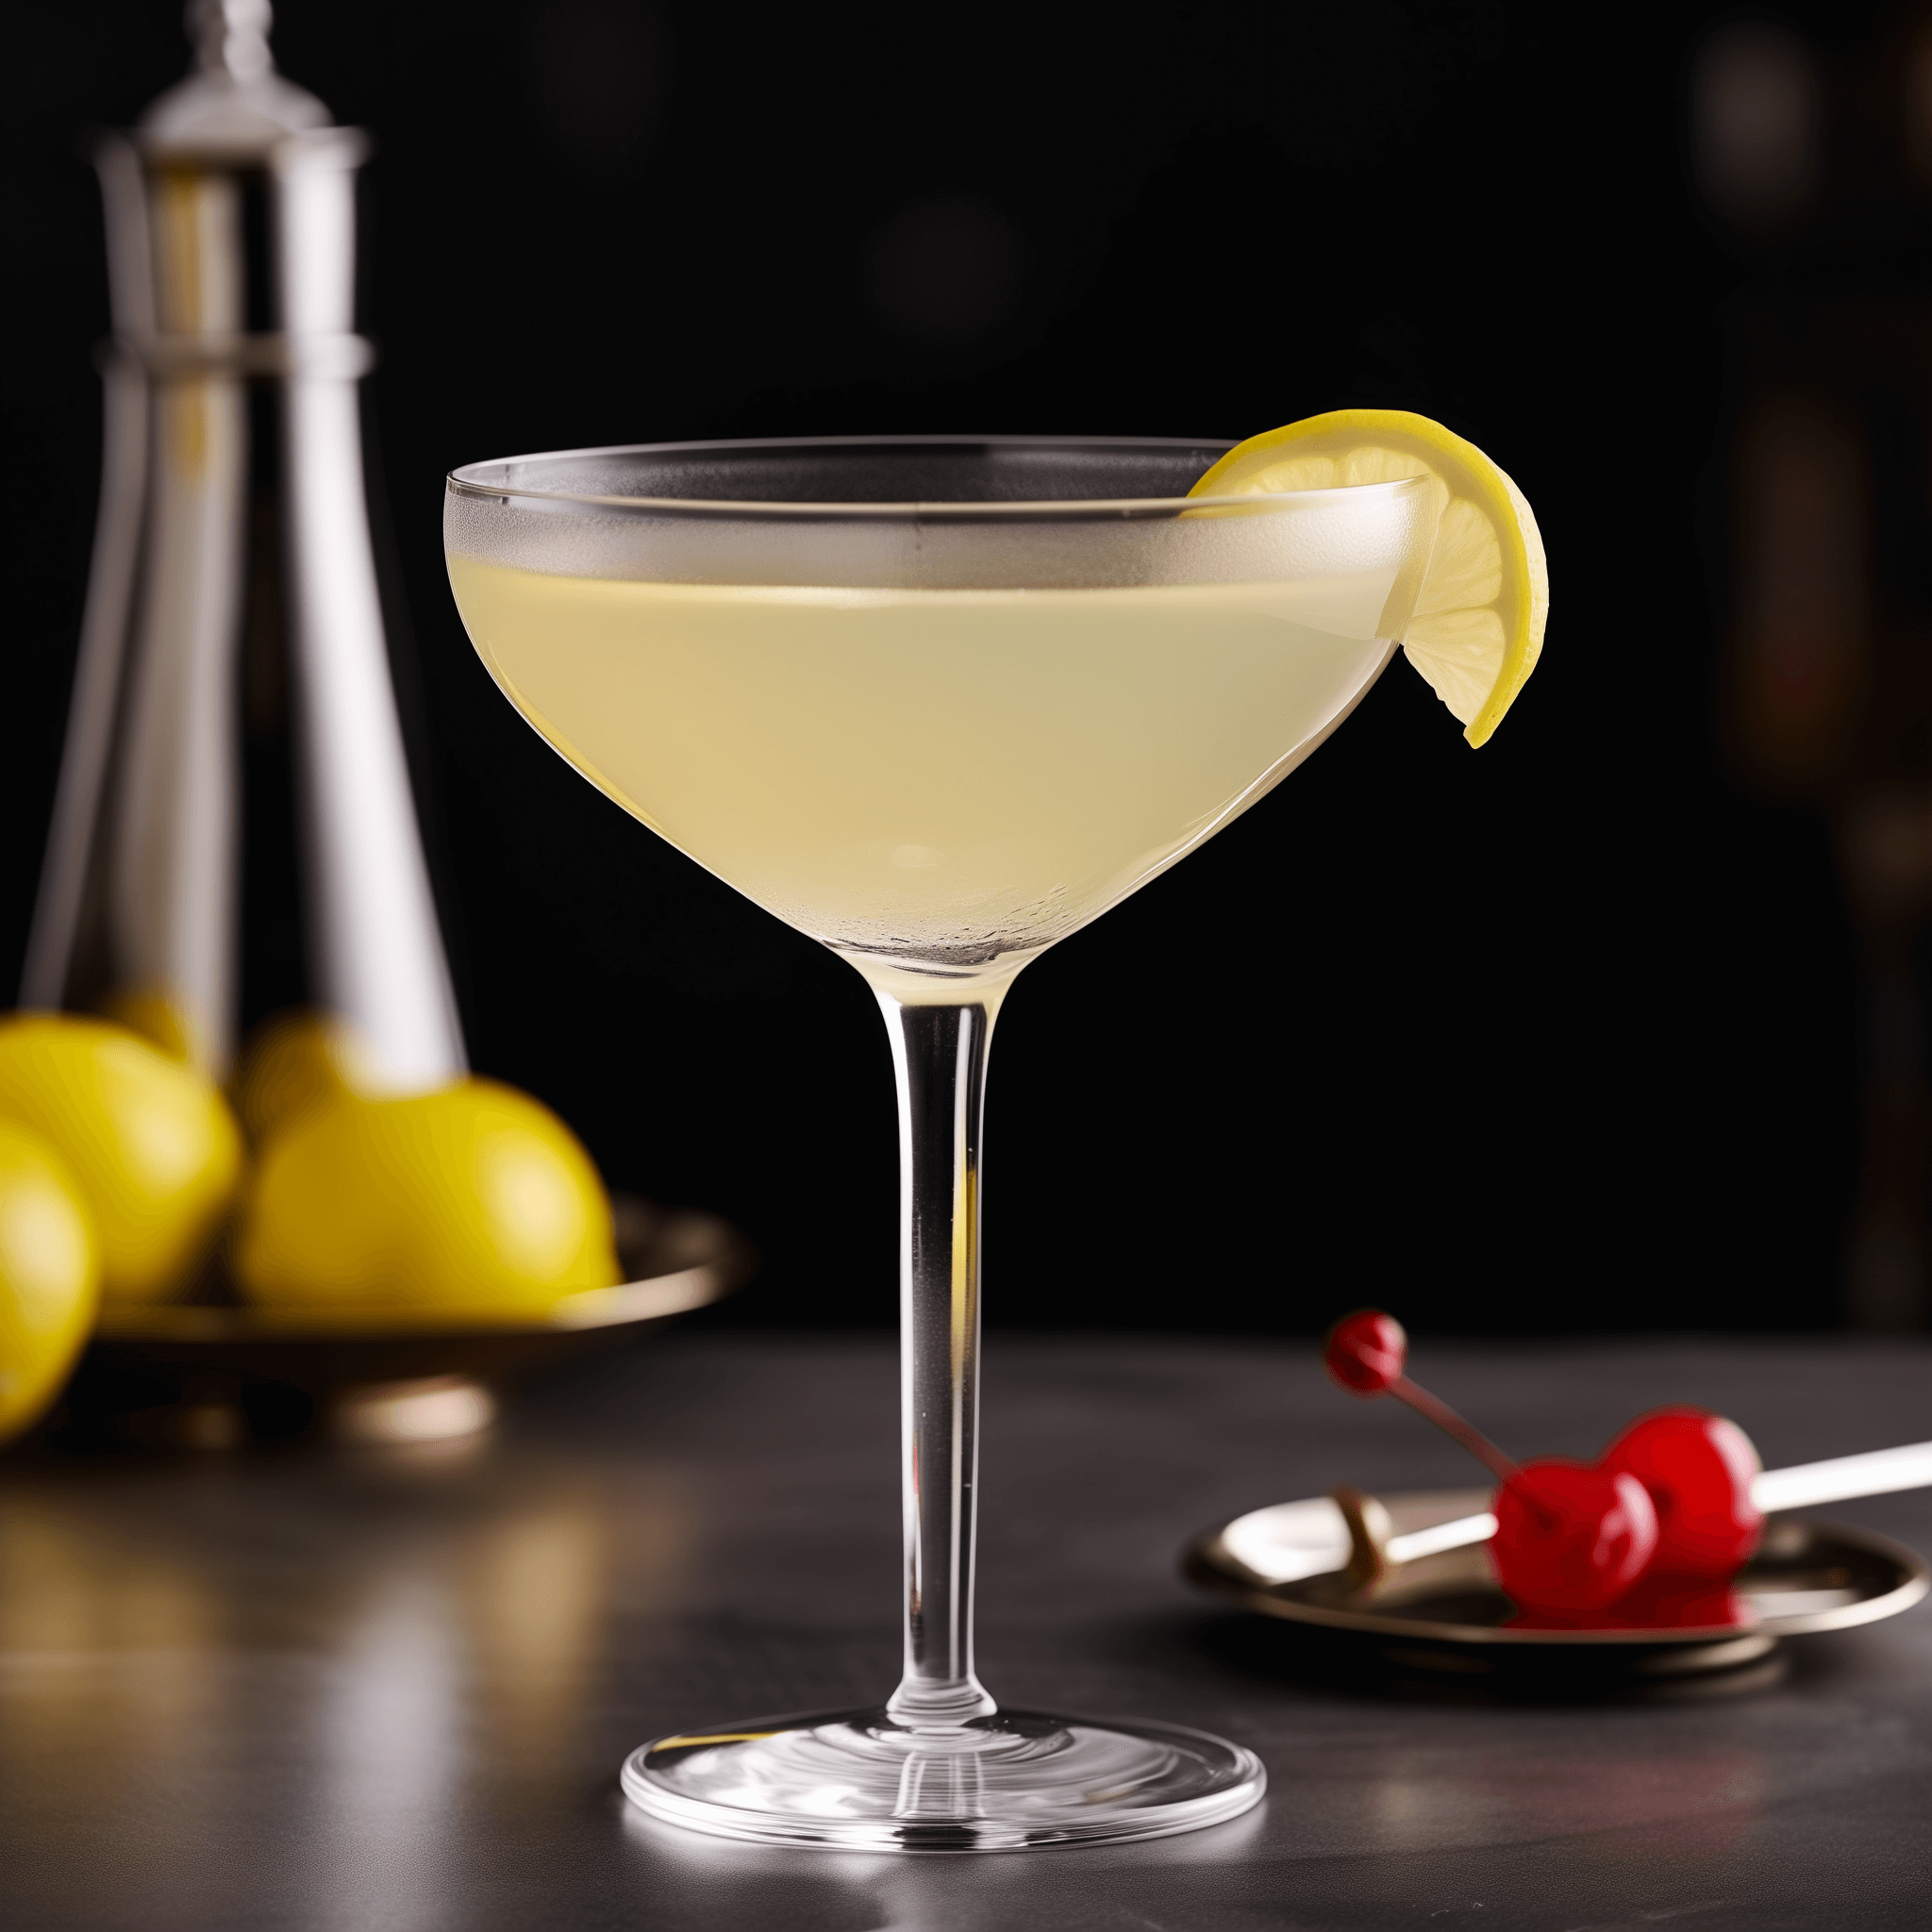 Casino Cocktail Recipe - The Casino cocktail offers a harmonious blend of flavors, with a slightly sweet and sour taste. The gin provides a strong, botanical backbone, while the maraschino liqueur adds a touch of sweetness. The fresh lemon juice brings a zesty, tangy element, and the orange bitters round out the flavor profile with a subtle, citrusy bitterness.